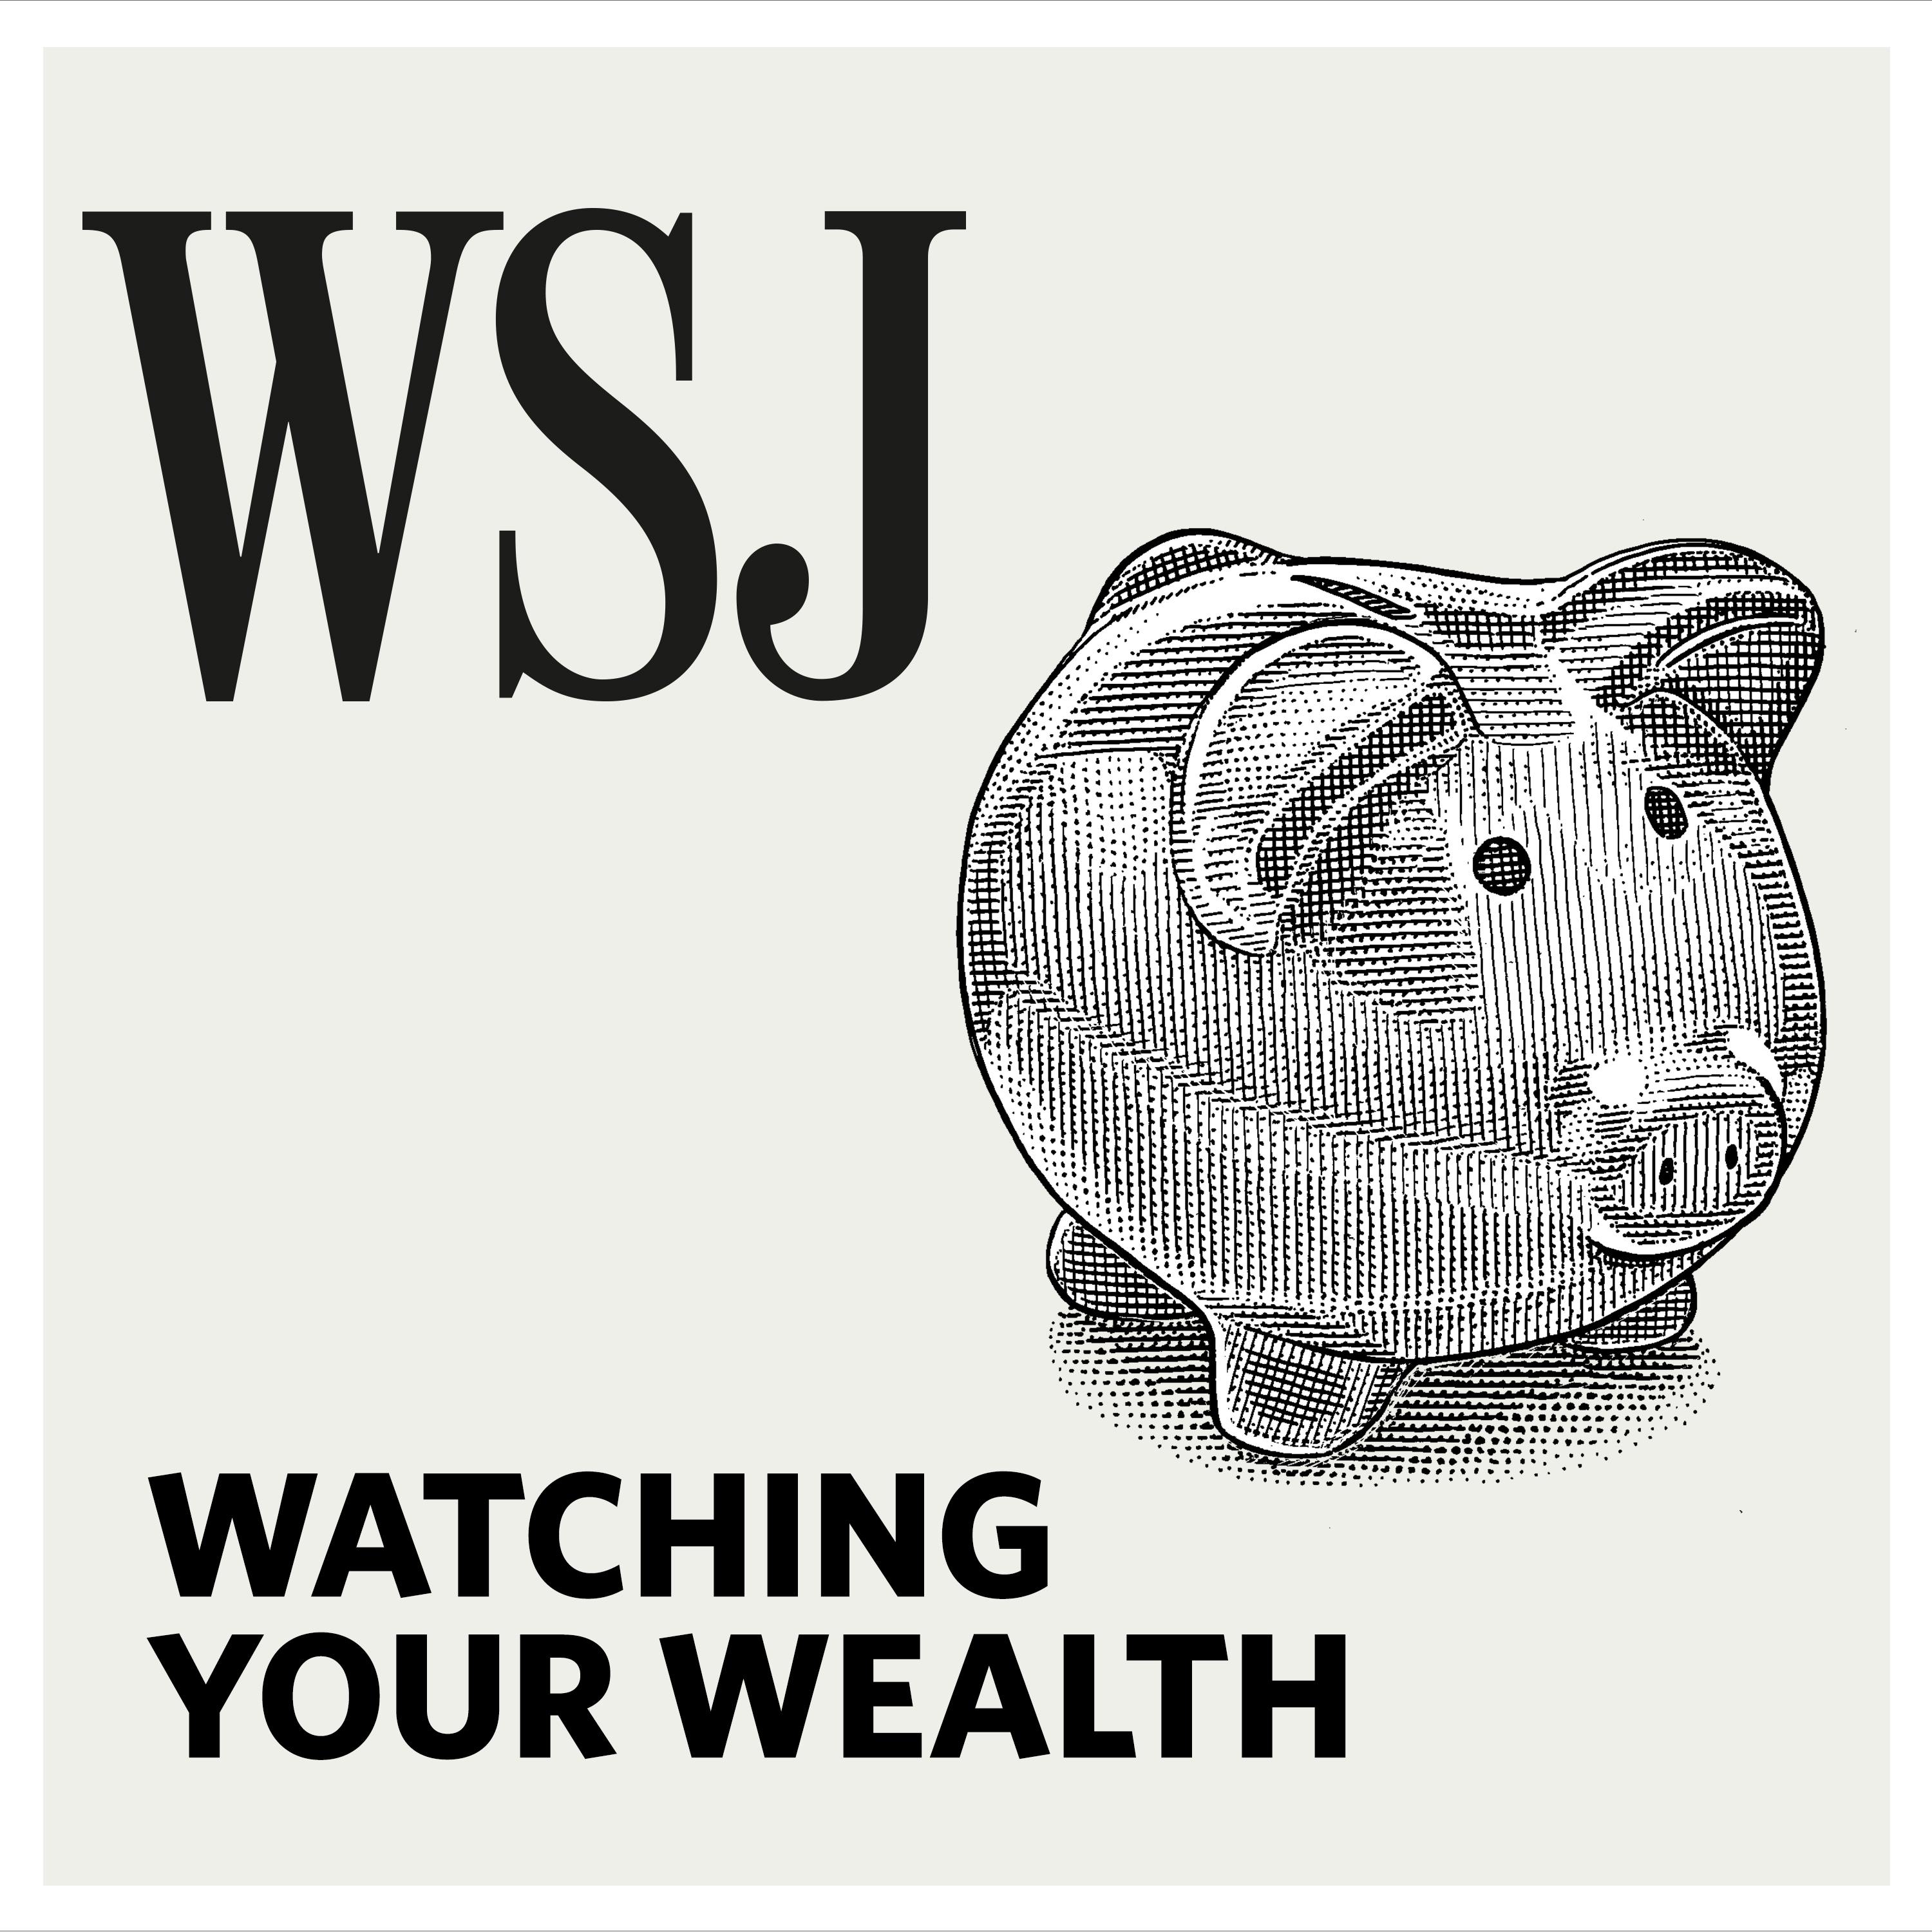 WSJ Watching Your Wealth:Veronica Dagher, The Wall Street Journal